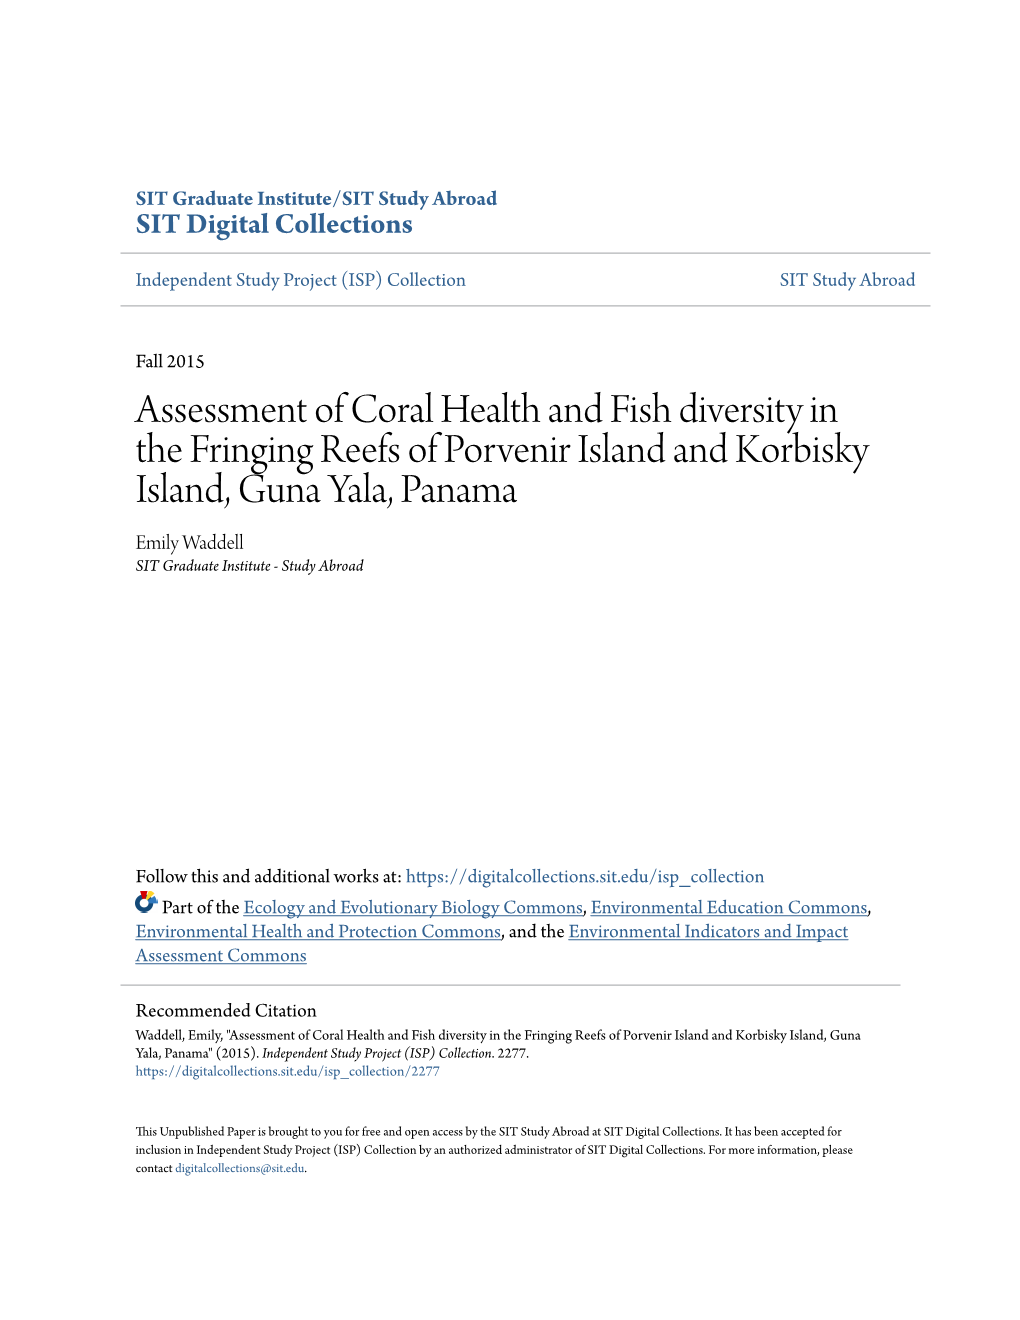 Assessment of Coral Health and Fish Diversity in the Fringing Reefs Of